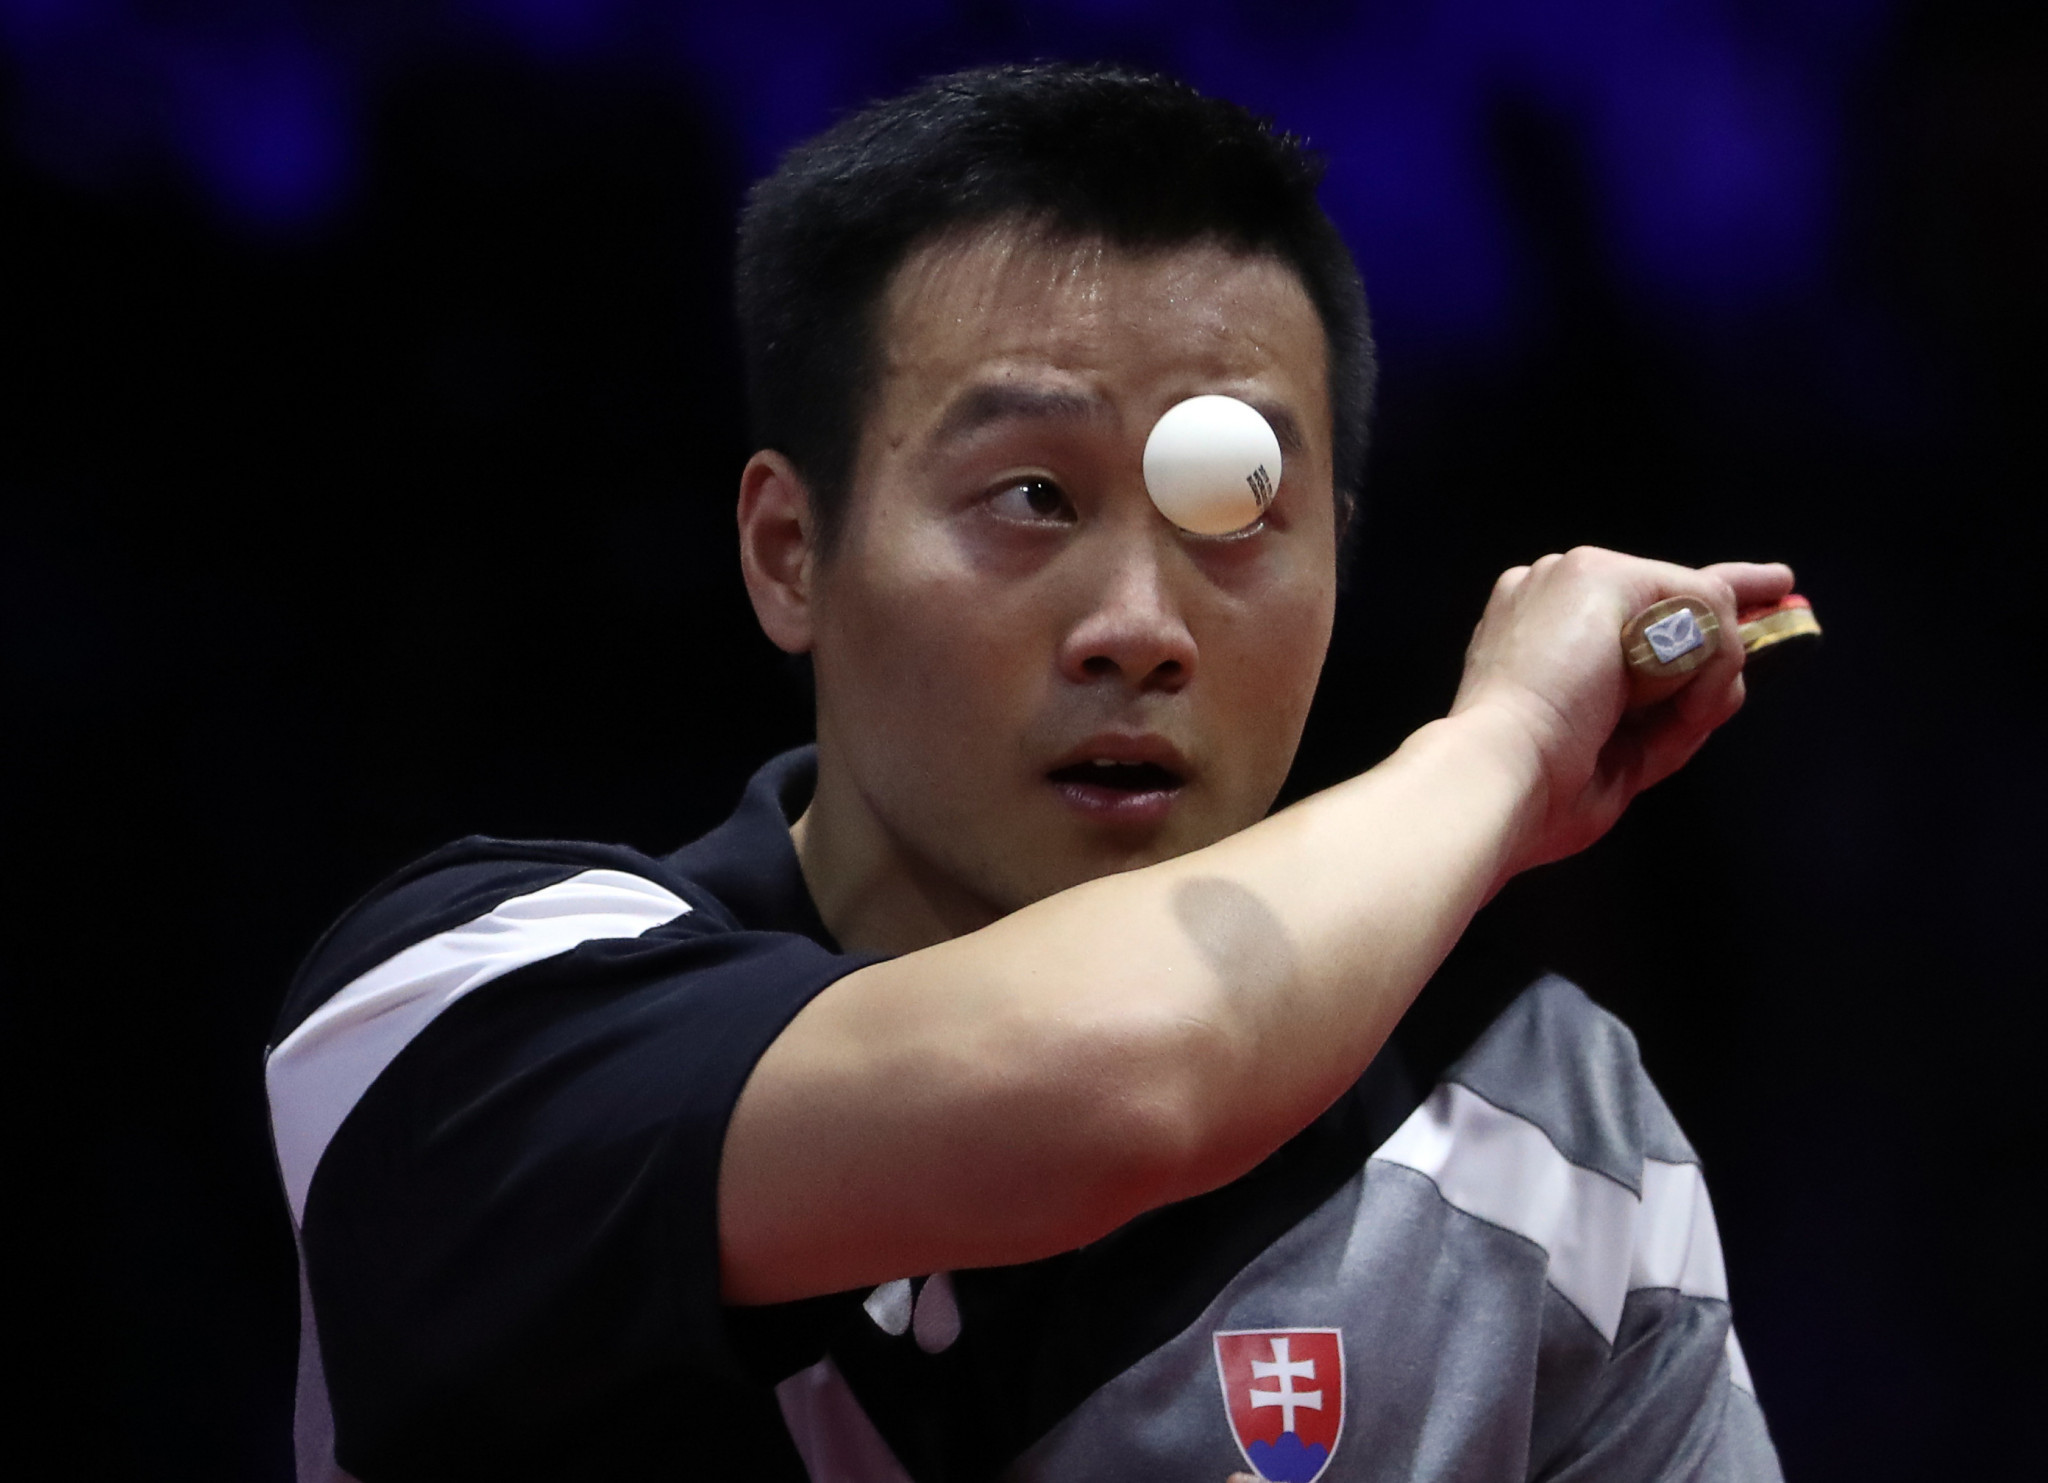 Yang Wang of Slovakia was eliminated from the men's singles for breaching COVID-19 regulations ©Getty Images